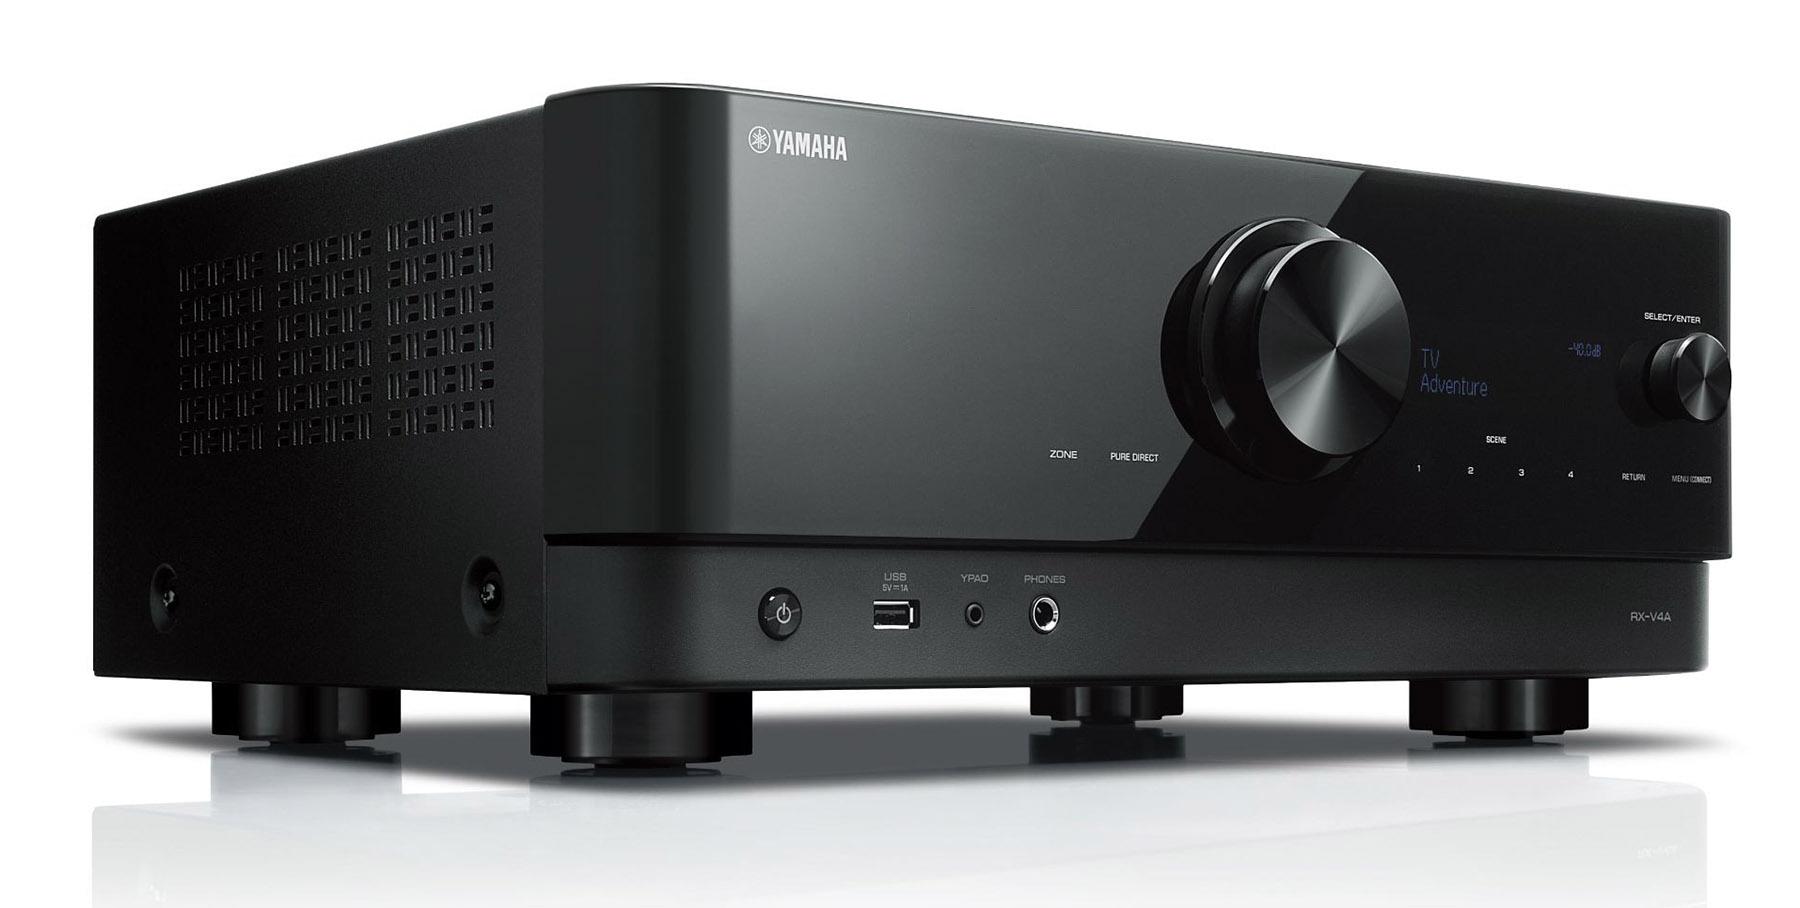 The least expensive of Yamaha’s new generation of AV receivers has features and performance that once cost thousands, and some that will keep it current for years. 3133f26b yahamarx v4afront